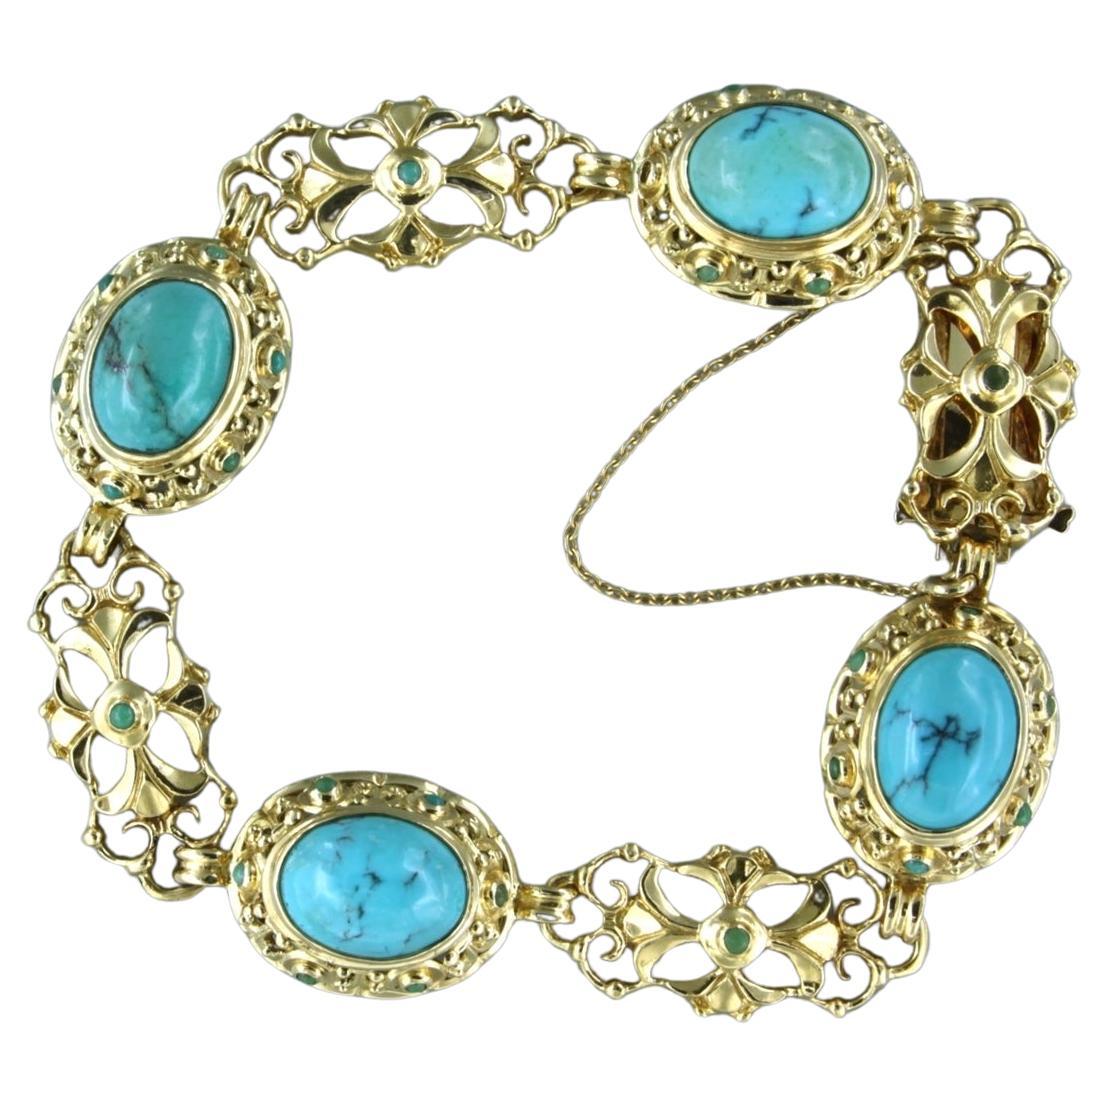 18k yellow gold bracelet set with turquoise - 18 cm long For Sale